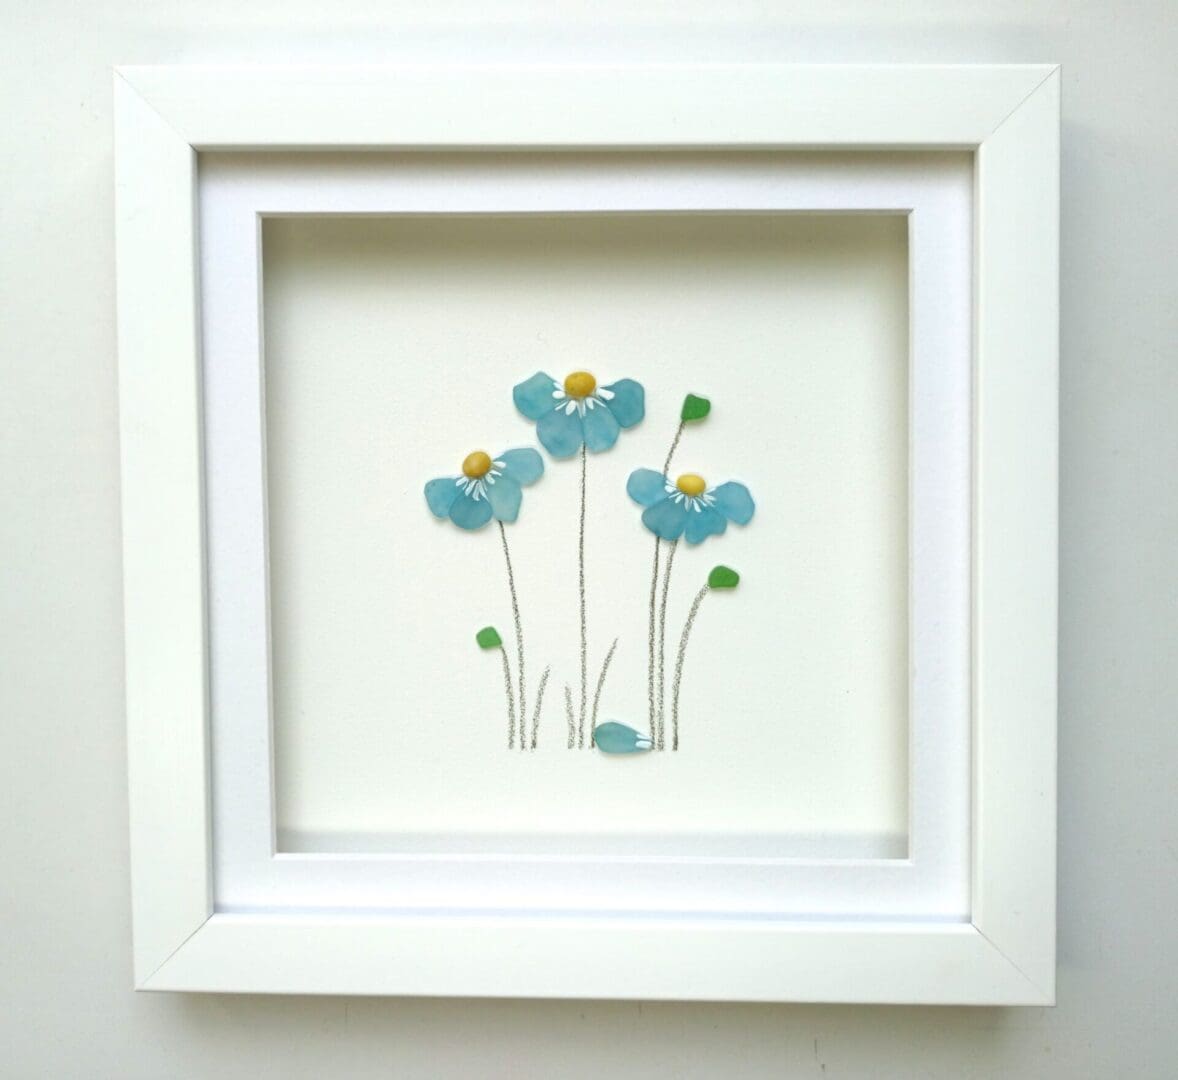 sea glass forget me nots in 24cm square frame